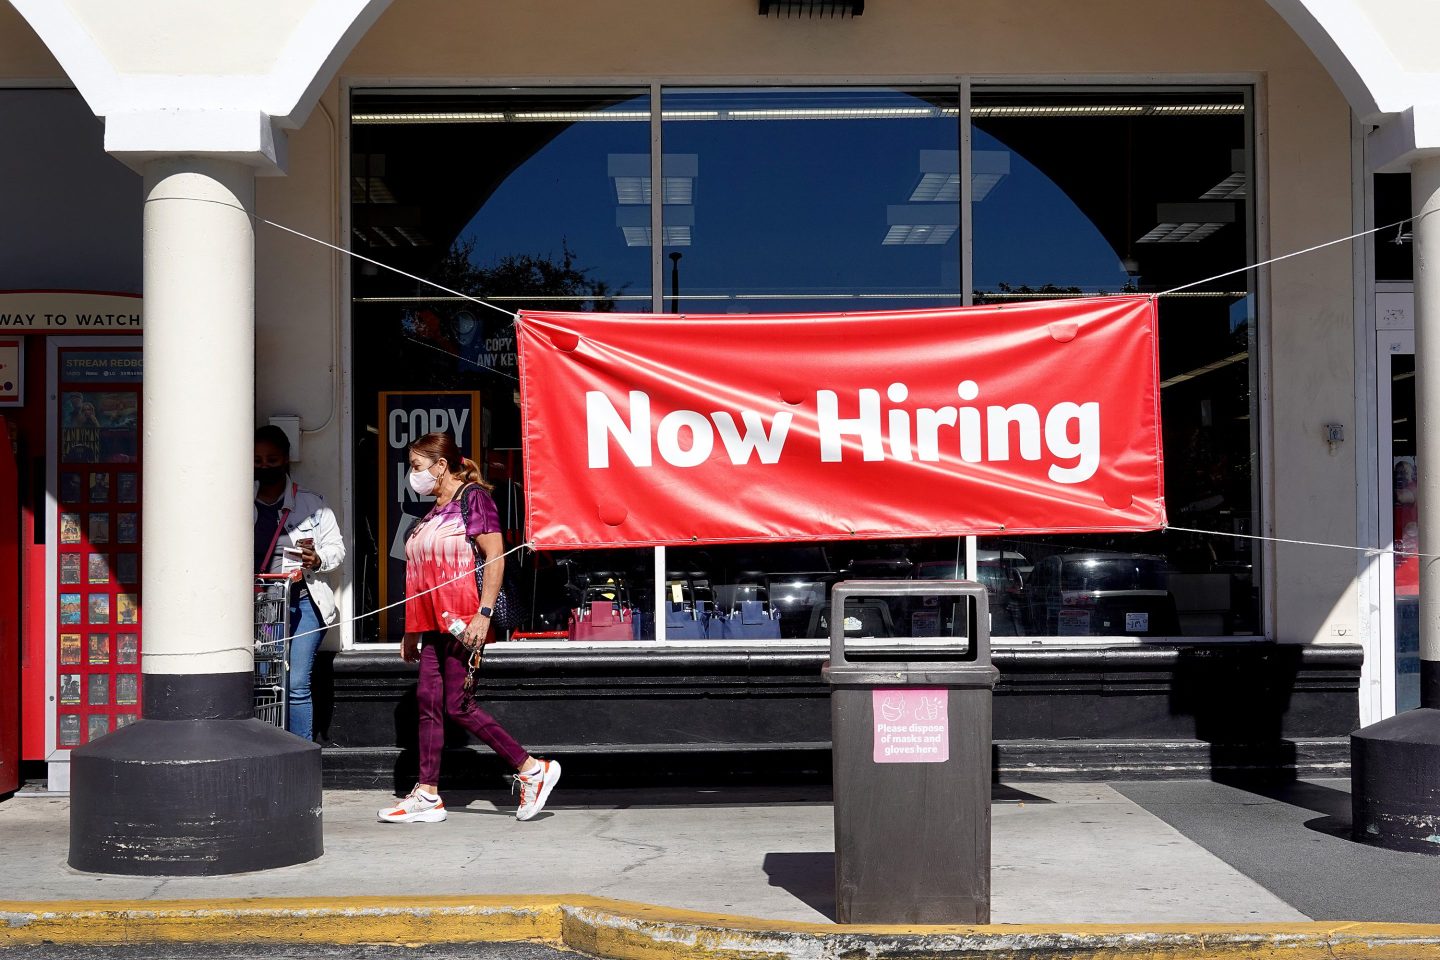 MIAMI, FLORIDA &#8211; DECEMBER 03:  A Now Hiring sign hangs in front of a Winn-Dixie grocery store on December 03, 2021 in Miami, Florida.  The Labor Department announced that payrolls increased by just 210,000 for November, which is below what economists expected, though the unemployment rate fell to 4.2% from 4.6%.  (Photo by Joe Raedle/Getty Images)